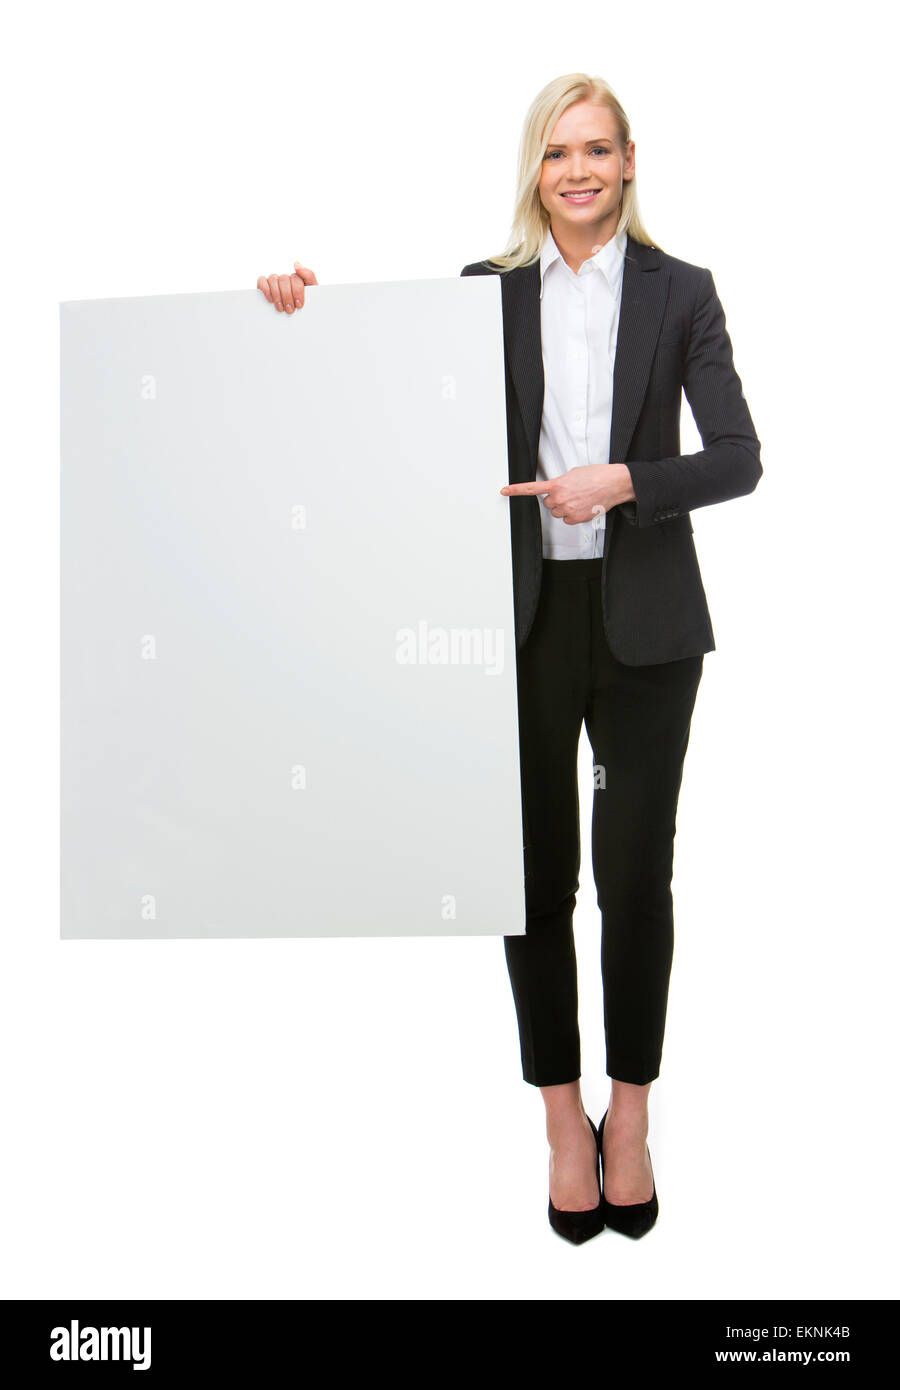 blonde smiling businesswoman with white placard Stock Photo